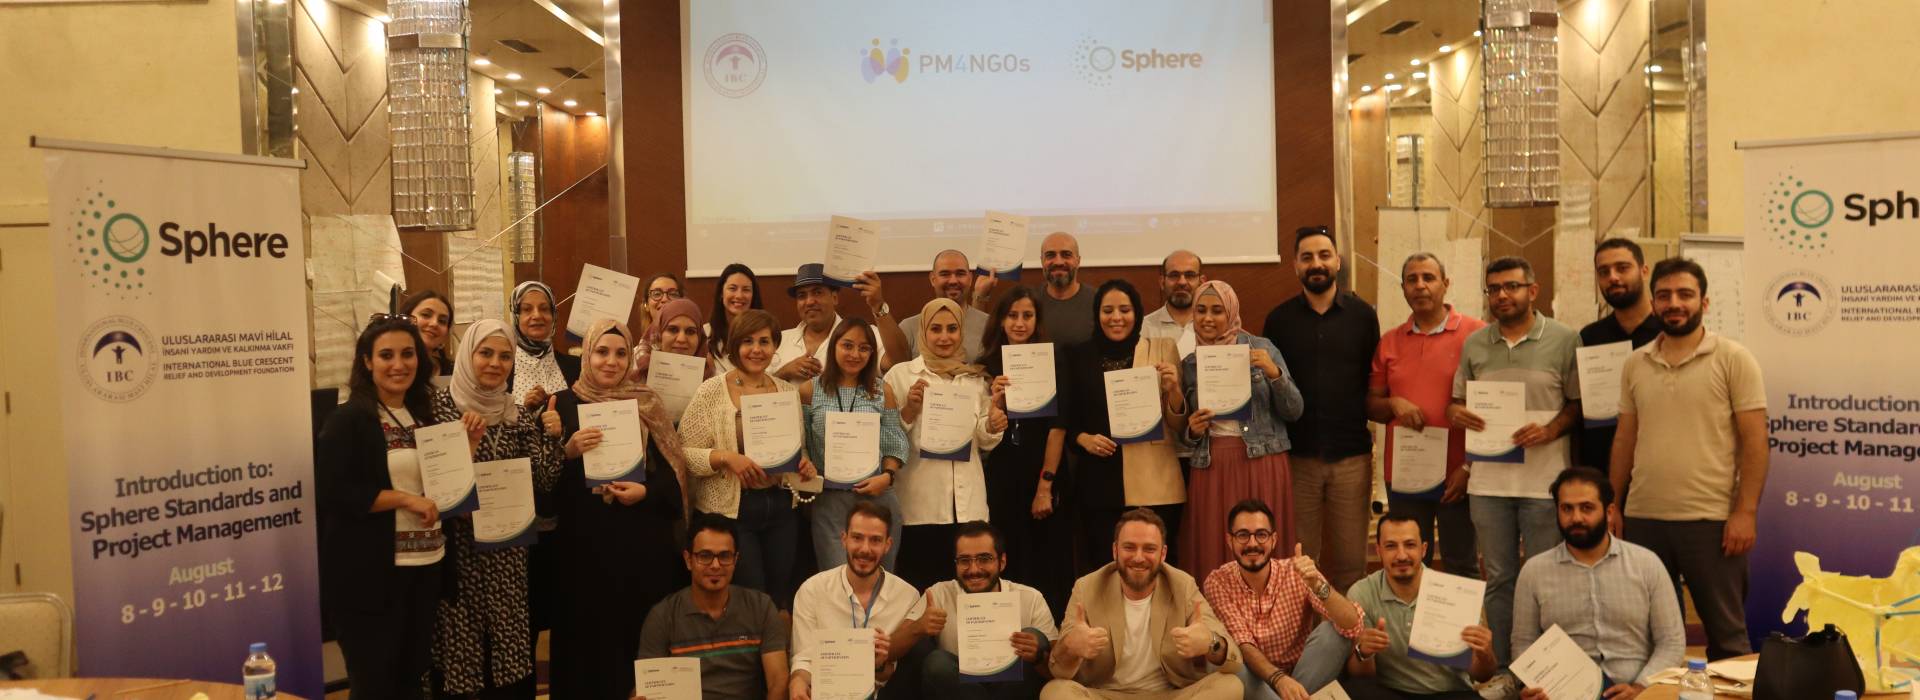 Introduction to Sphere Standards and Project Management Training IBC and Sphere to Achieve High-Level Quality Standards in Humanitarian Actions